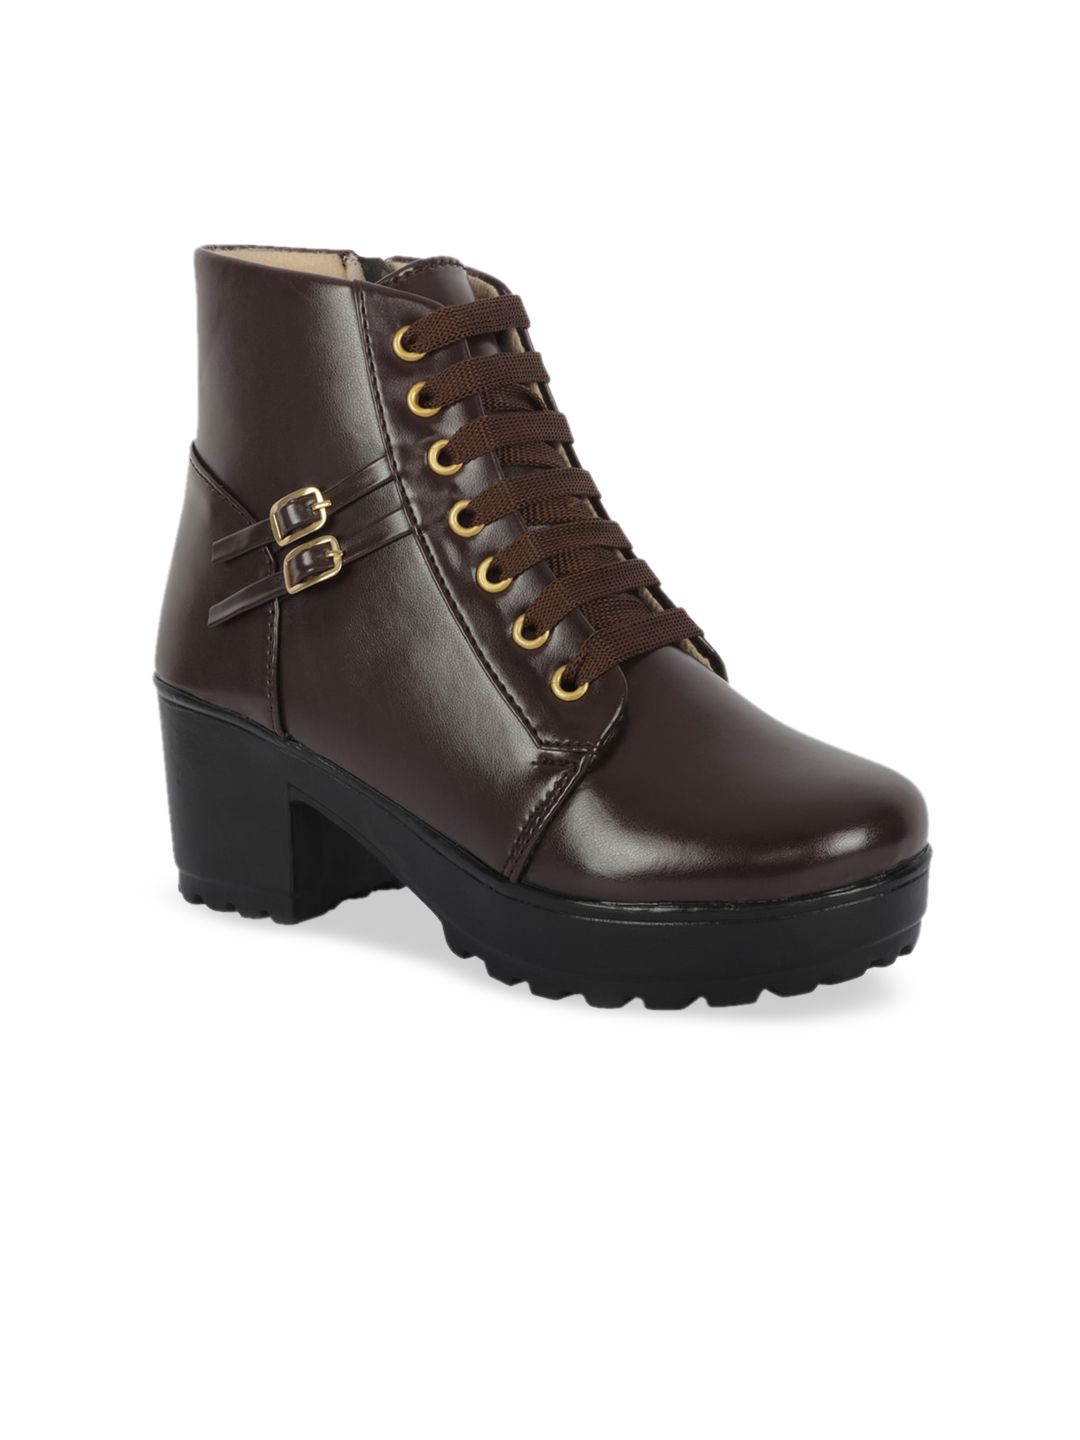 ZAPATOZ Women Coffee Brown Solid Heeled Boots Price in India